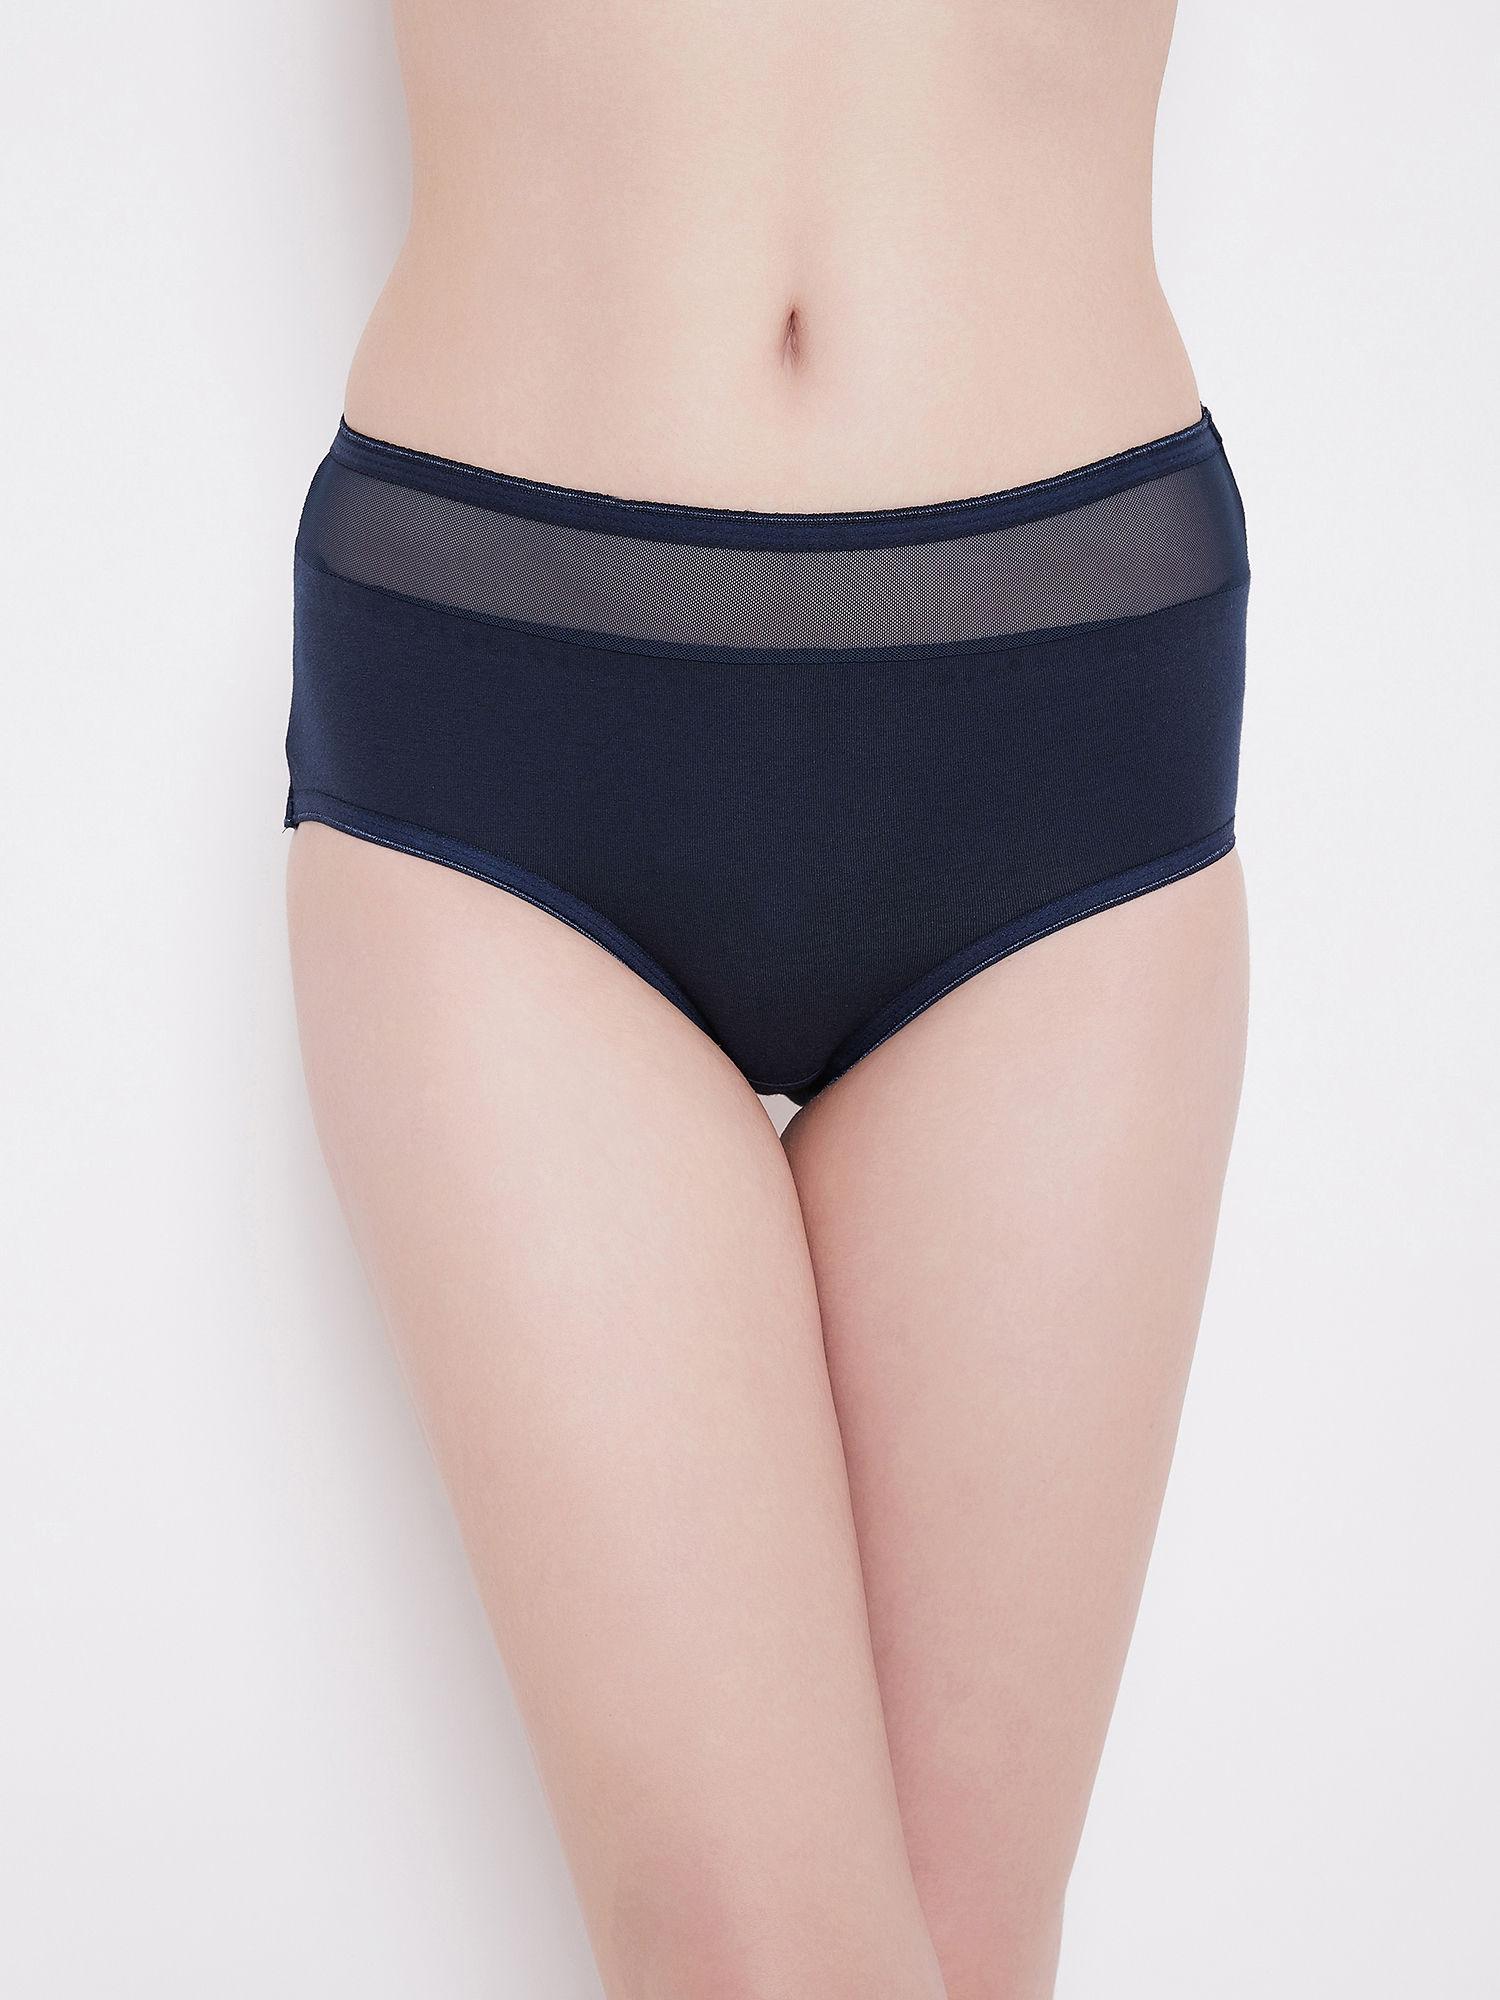 high waist hipster panty with sheer waist in navy blue - cotton